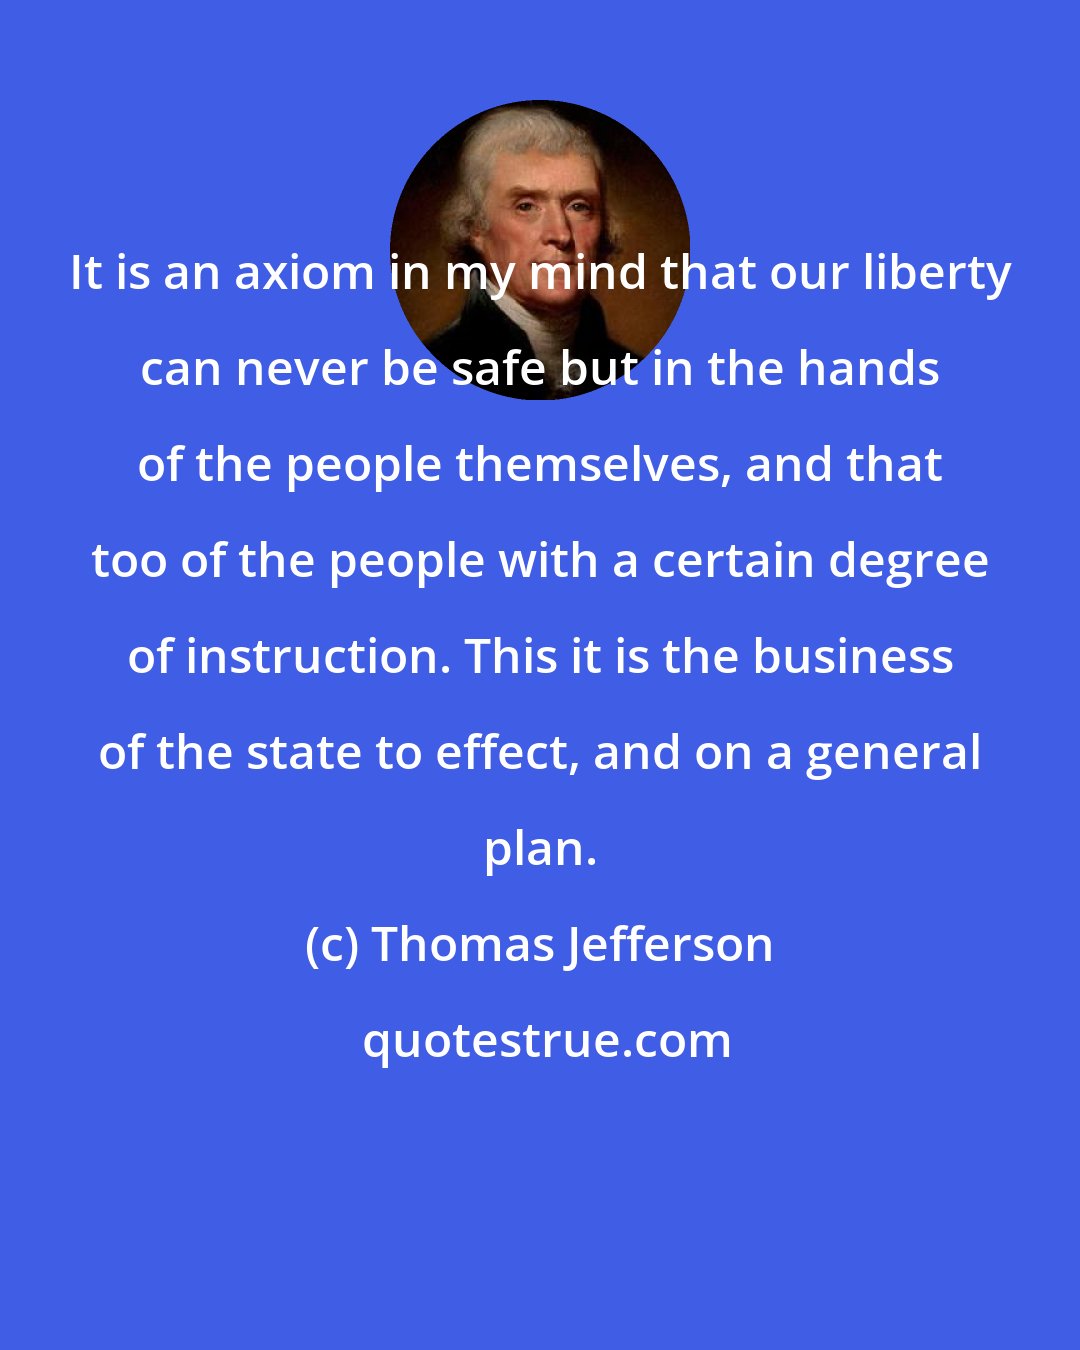 Thomas Jefferson: It is an axiom in my mind that our liberty can never be safe but in the hands of the people themselves, and that too of the people with a certain degree of instruction. This it is the business of the state to effect, and on a general plan.